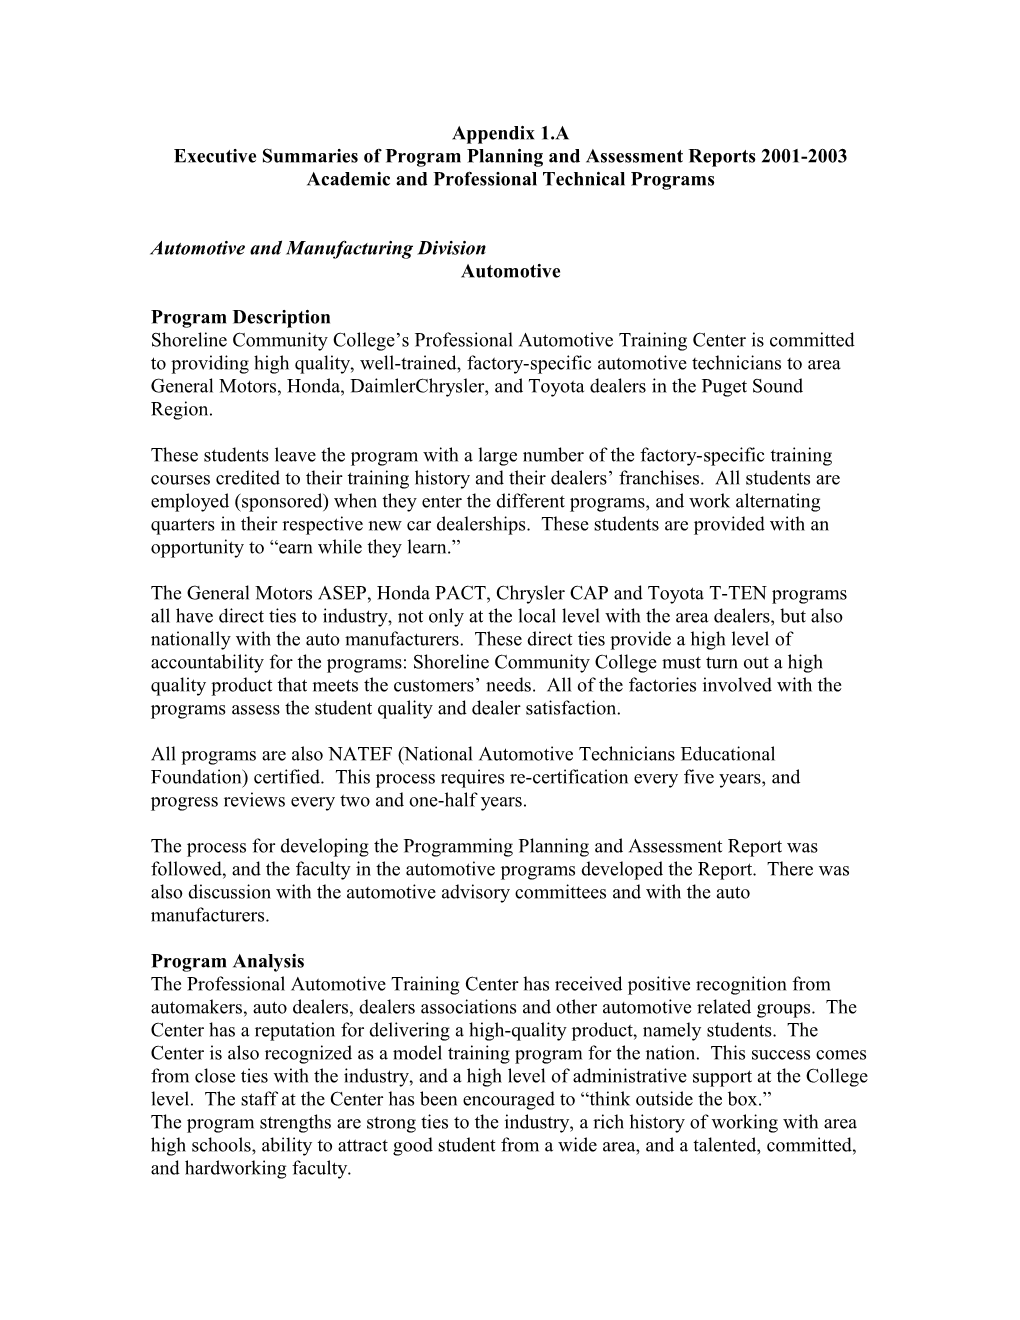 Executive Summaries of Program Planning and Assessment Reports 2001-2003